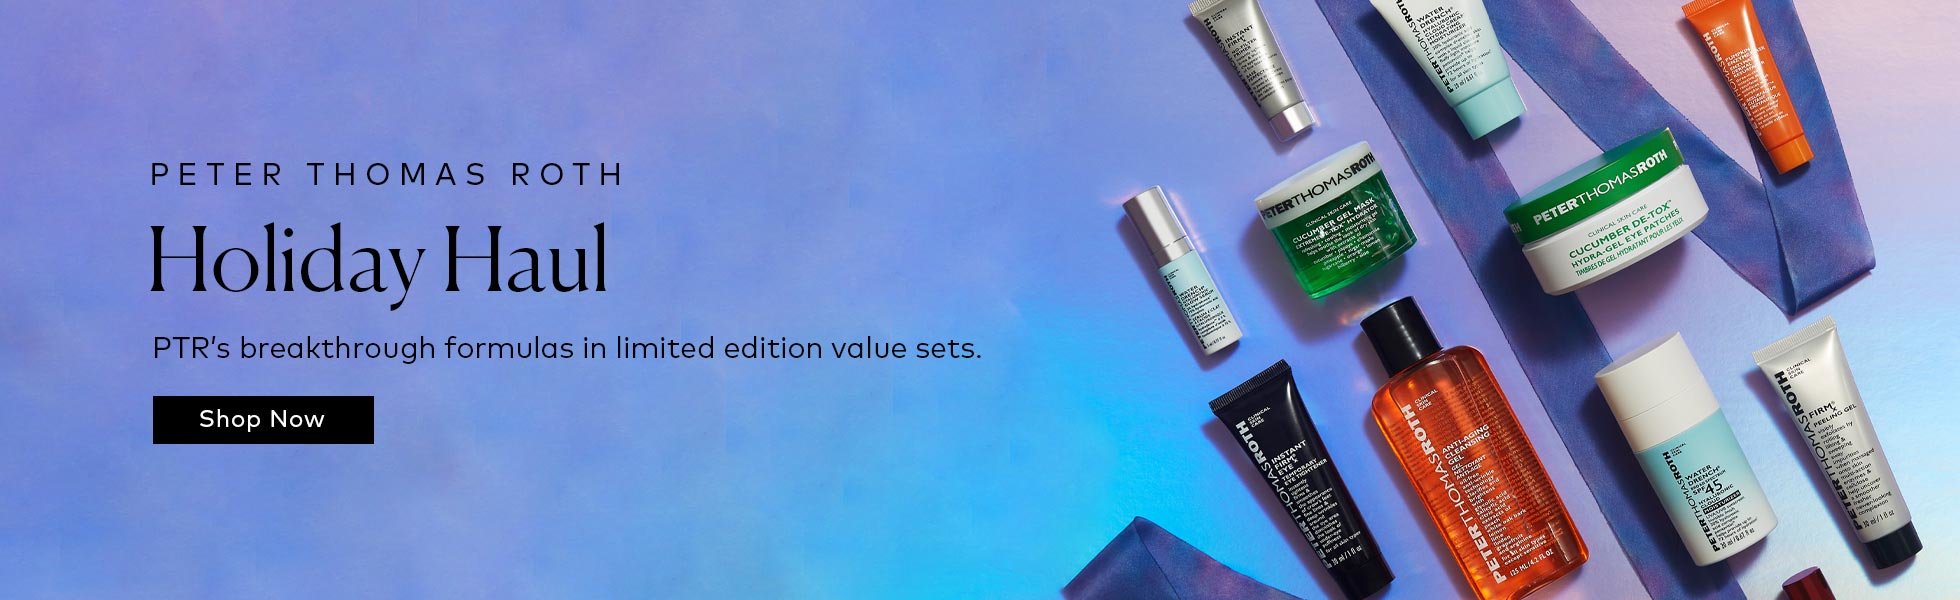 Shop the Peter Thomas Roth Holiday Collection at Beautylish.com